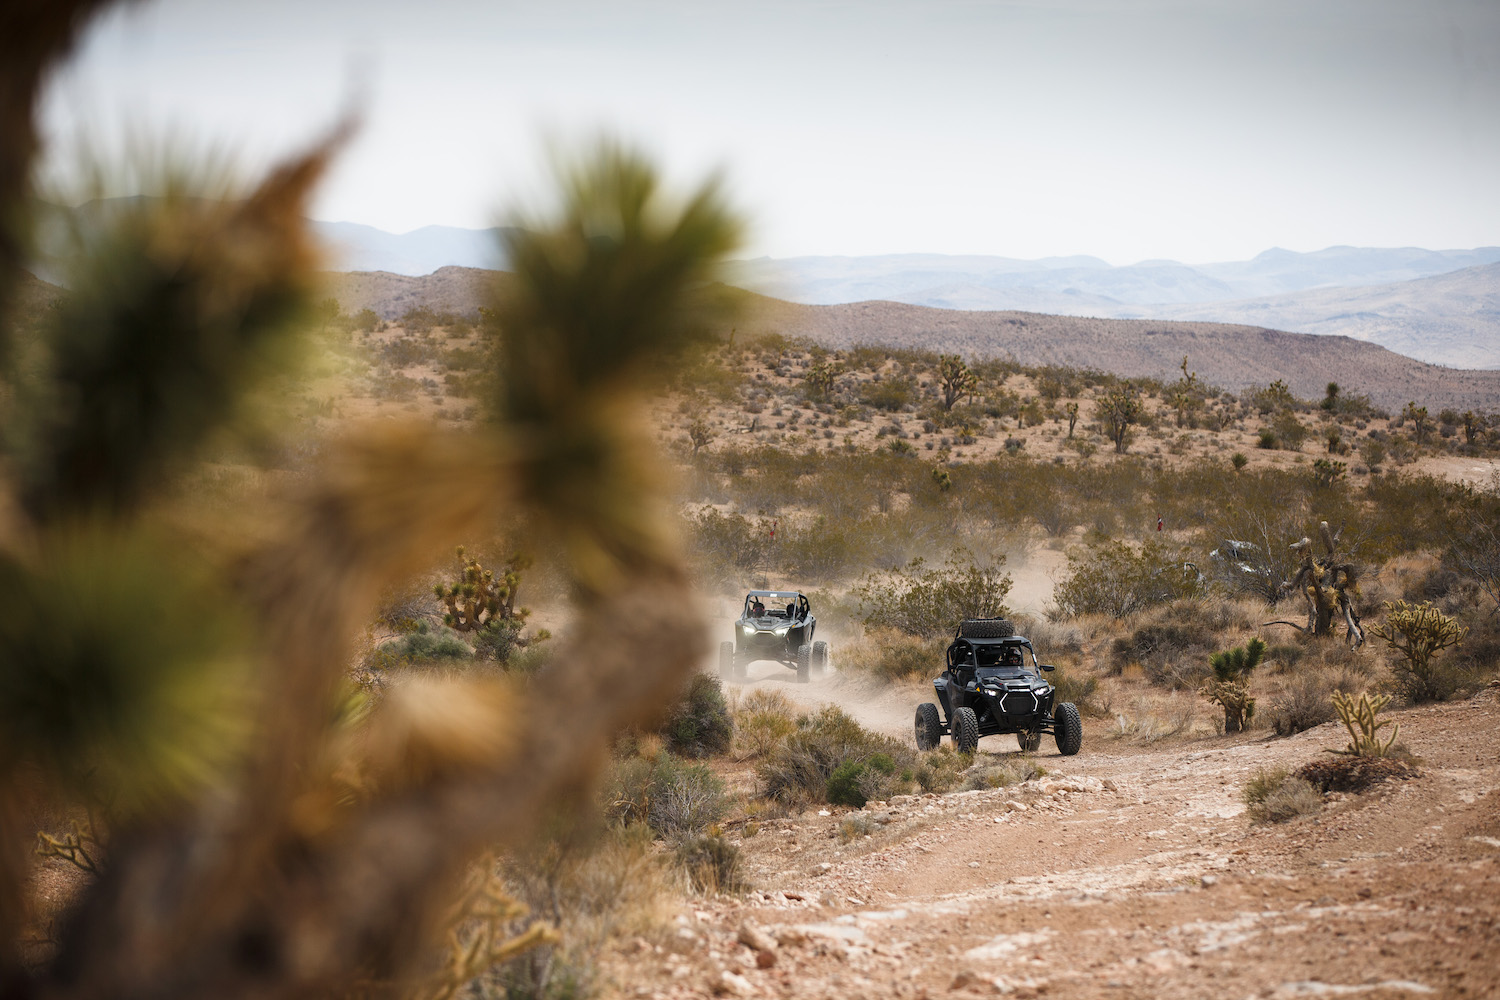 Far away shot of Polaris RZR Pro Rs driving through the Mojave desert with a cactus in the foreground.